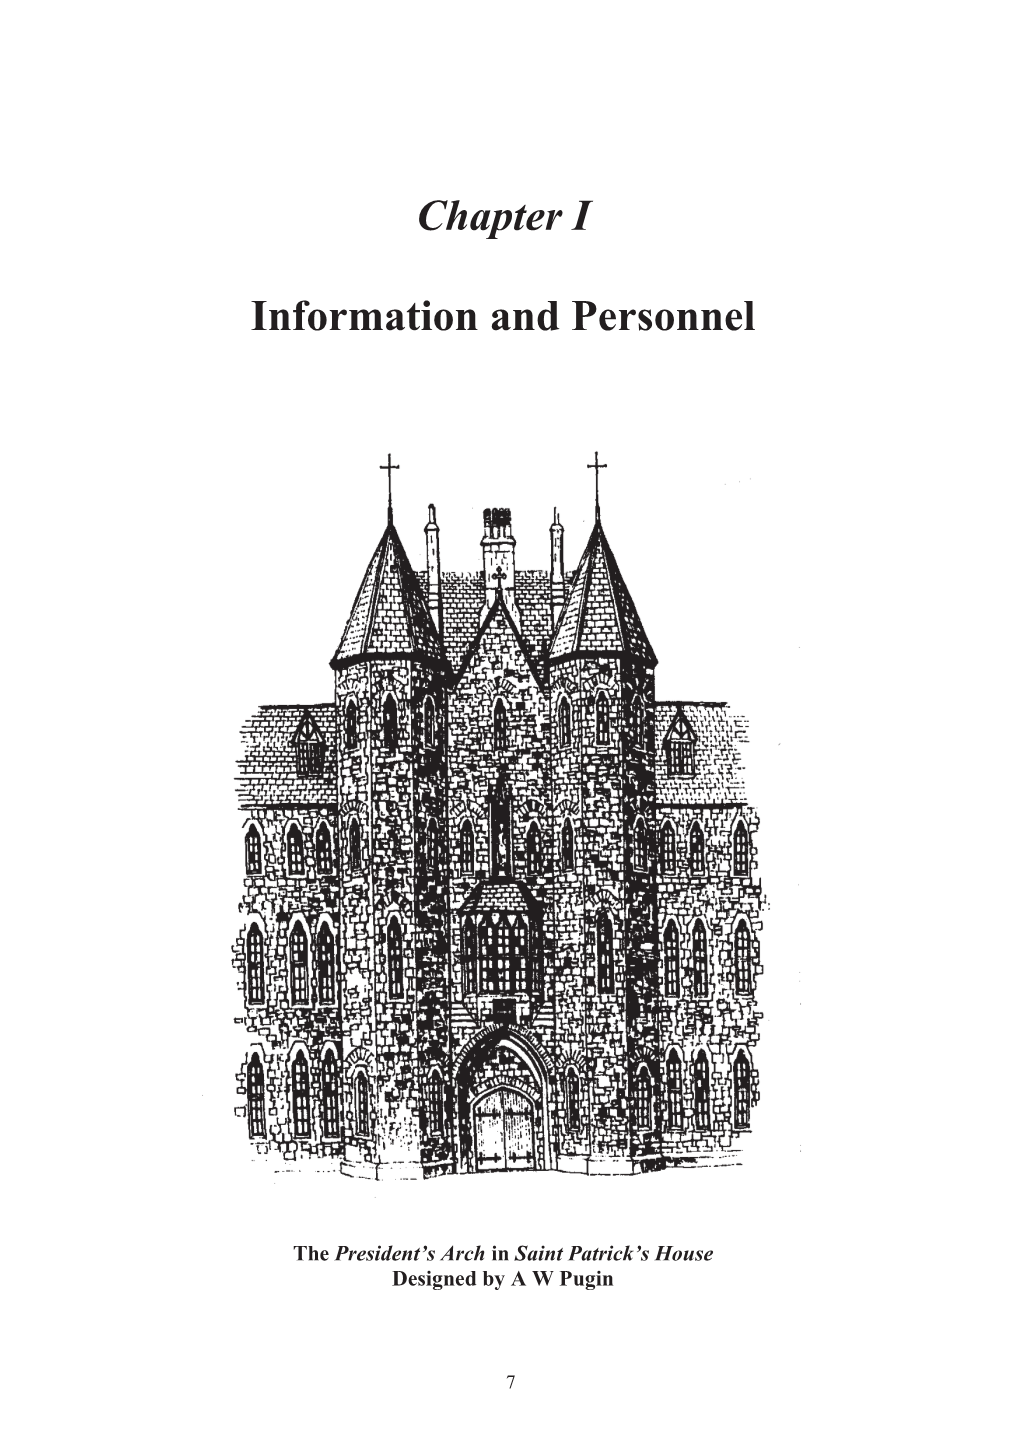 Chapter I Information and Personnel